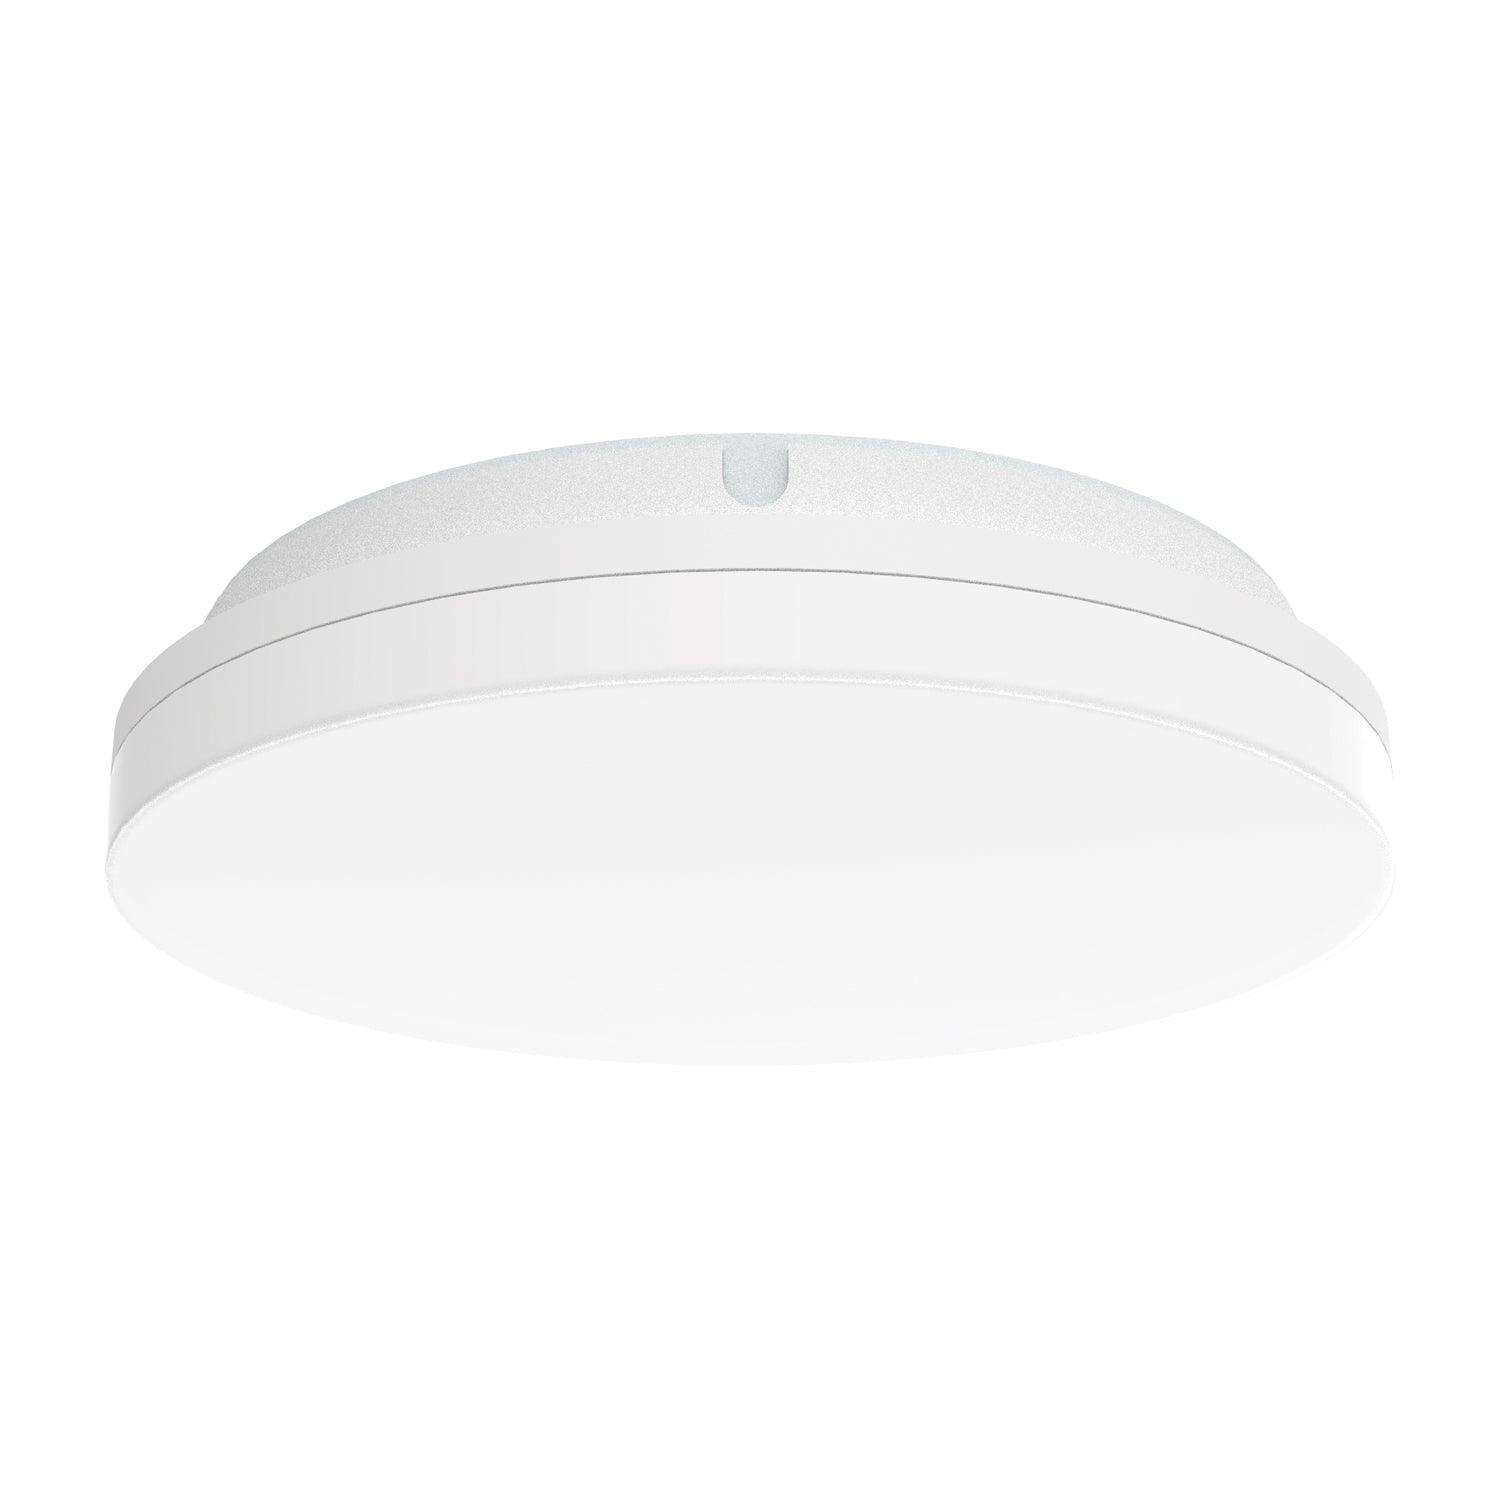 Domus Lighting Oyster Lights Round / 250mm / WHITE Sunset - 15W/25W/35W Colour Switchable Led Ceiling Light Ip54 240V - Trio Lights-For-You 20880